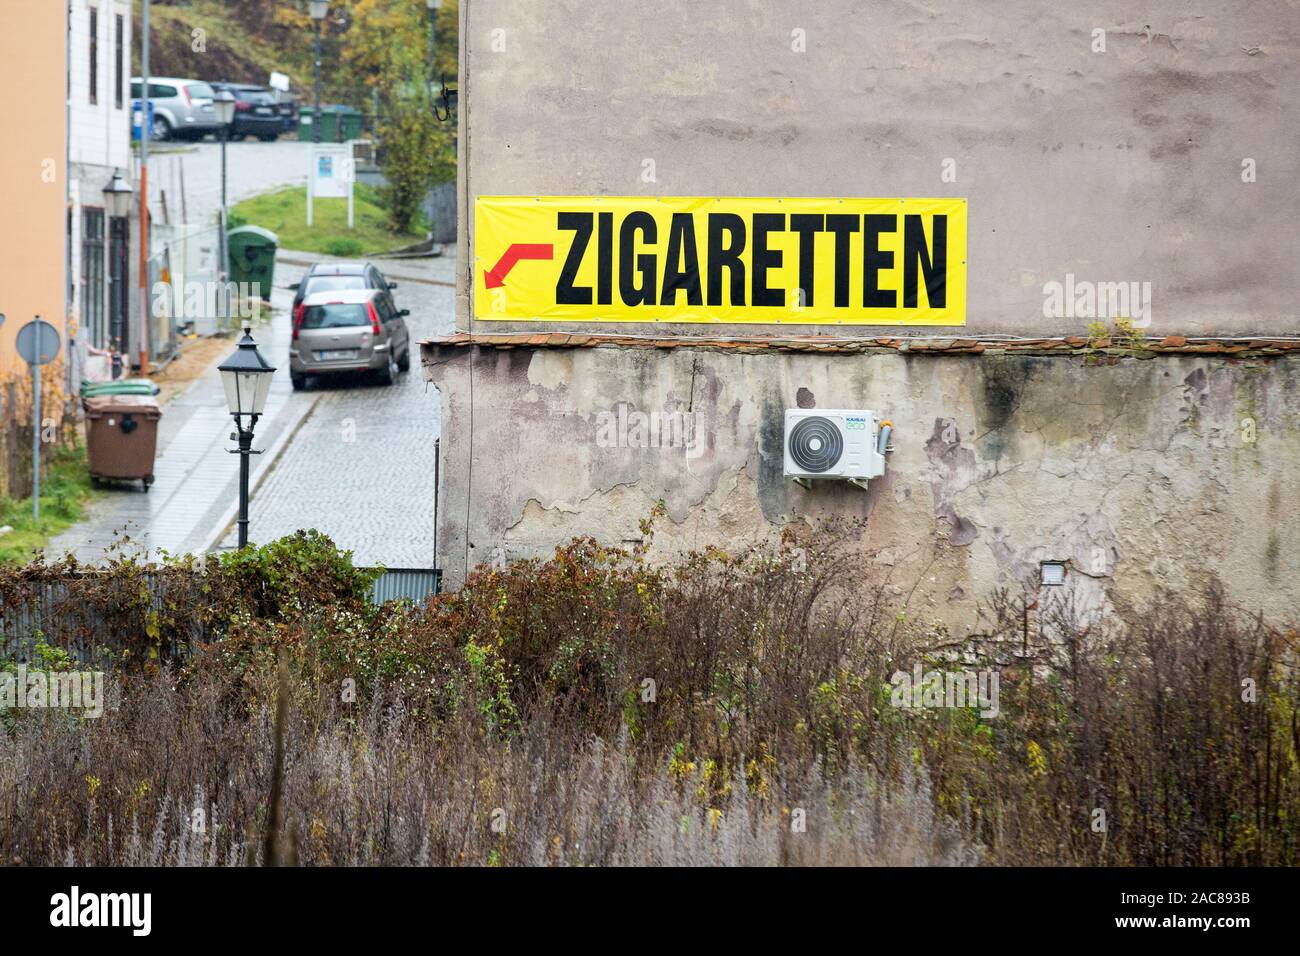 A banner informing about store with cigarettes seen in Zgorzelec.Zgorzelec  and Goerlitz are partner cities of the Euro region Neisse located in Saxony  (Germany) and Lower Silesia (Poland Stock Photo - Alamy